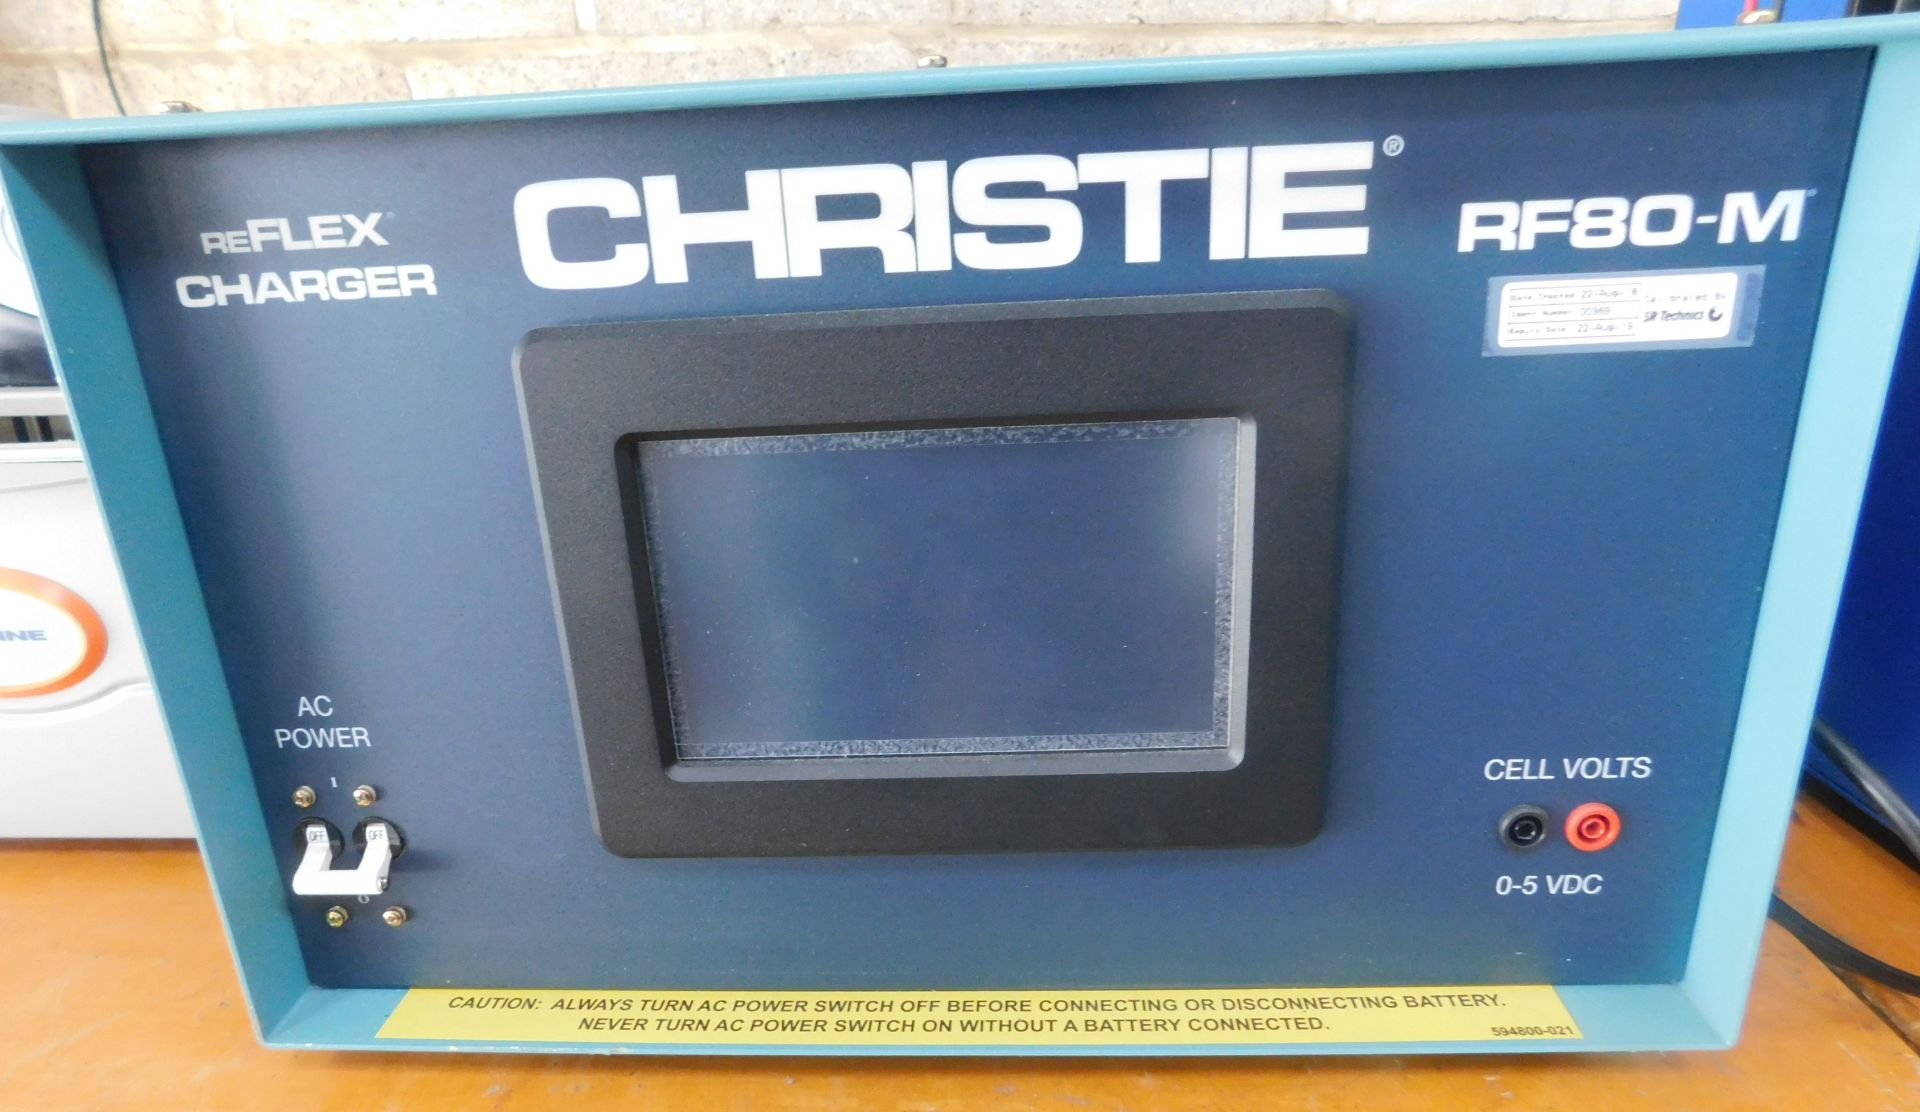 Christie RF80-M Reflex Charger, Part Number: 123020-001, S/N: 6173(Located Brentwood, See General